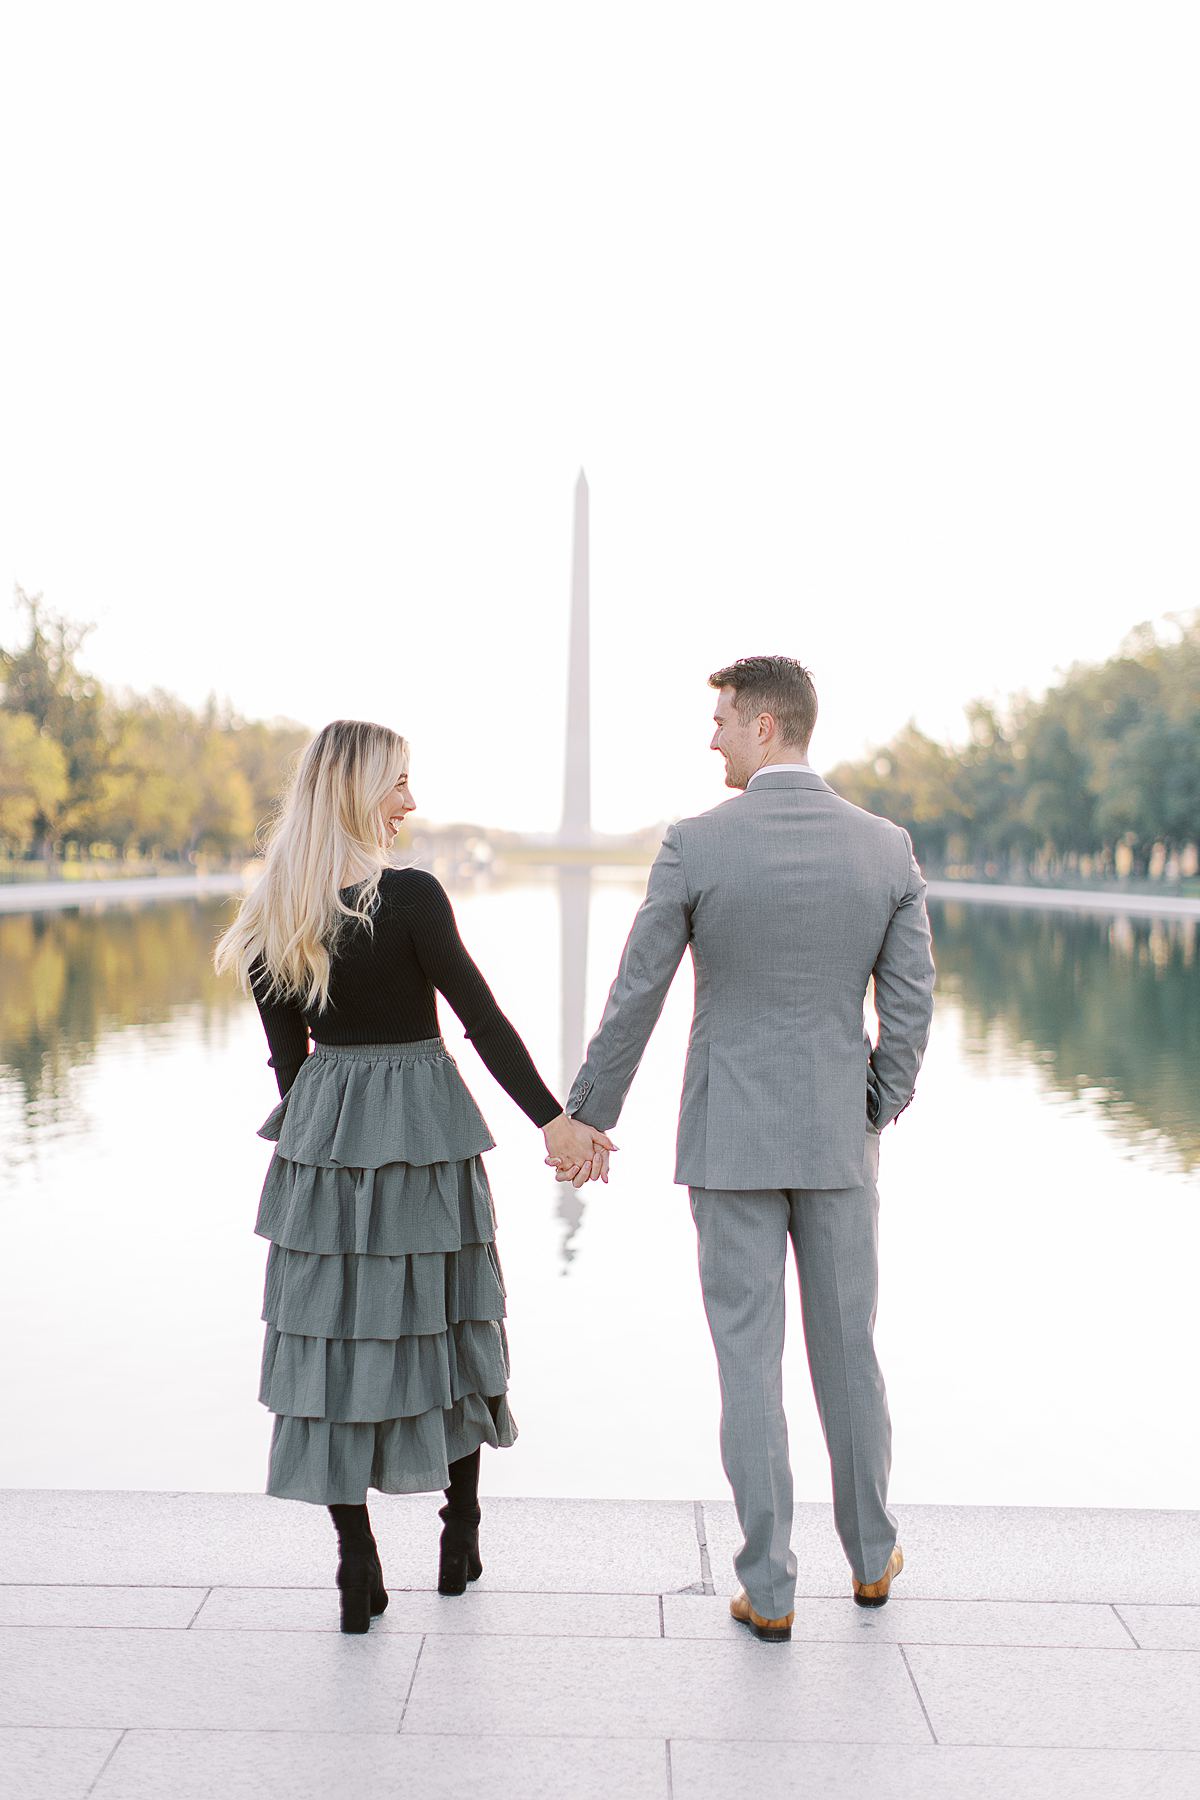 Sunrise at Lincoln Memorial for Engagement Session by Anna Wright